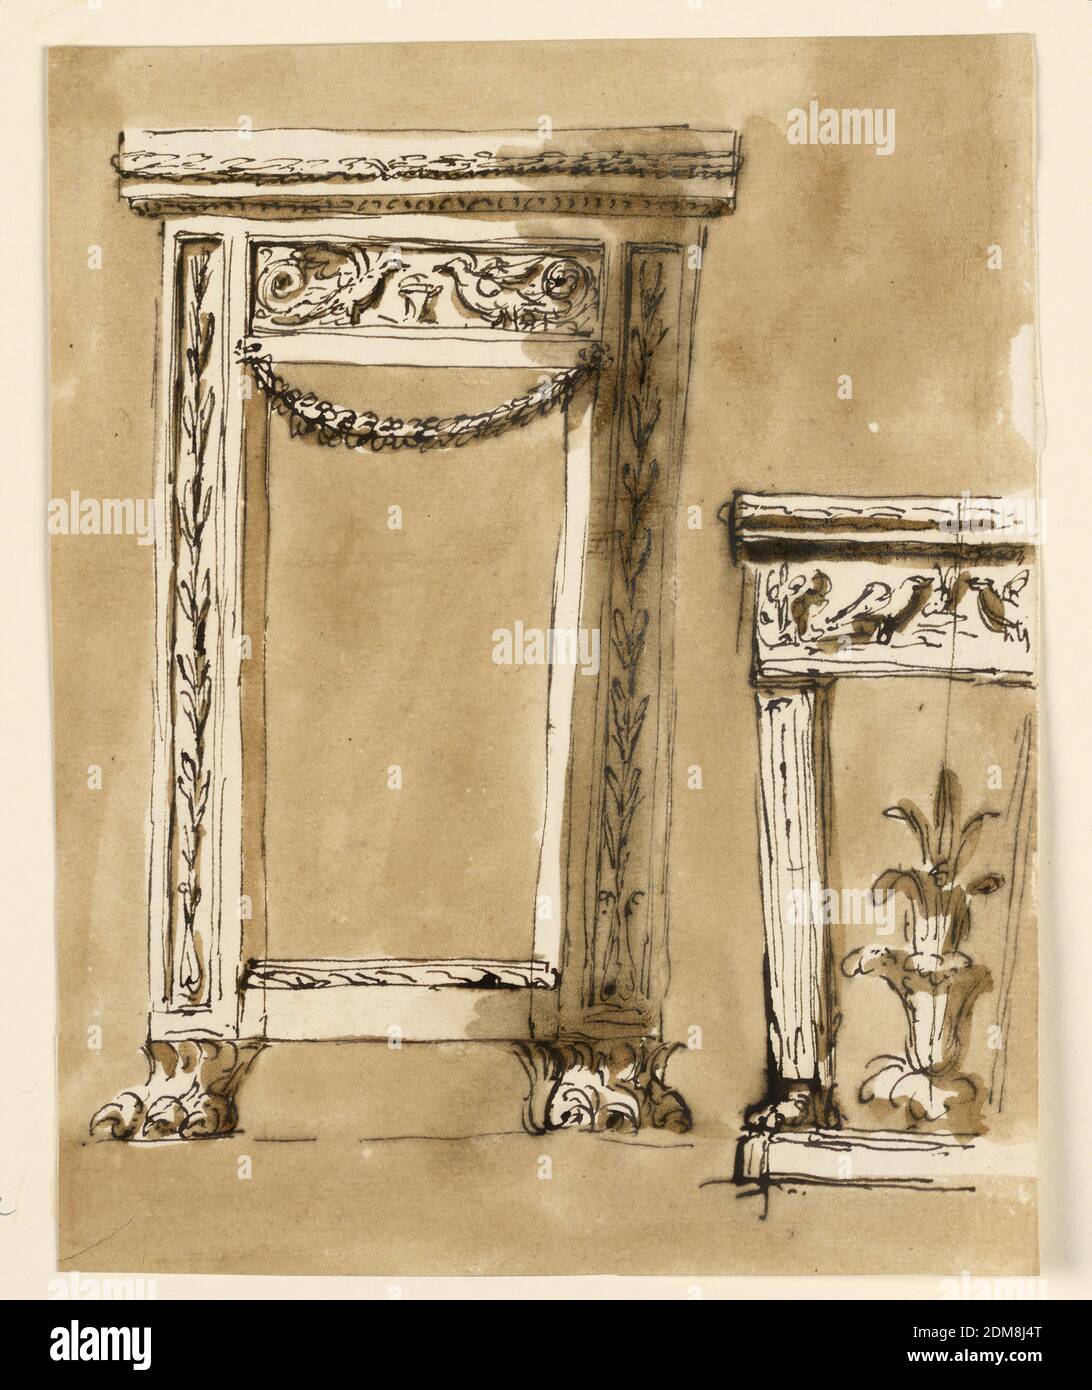 Console tables, Giuseppe Barberi, Italian, 1746–1809, Pen and brown ink, brush and brown wash on off-white laid paper, At left: like -2058, with slight variations of the decoration. At right: a left side. Supported by a pillar with a lion's foot upon a base. The front of the frame and the top are an entablature, with the same bird motif in the frieze. From the center of the base rises an acanthus plant. Usual background., Rome, Italy, ca. 1795, furniture, Drawing Stock Photo